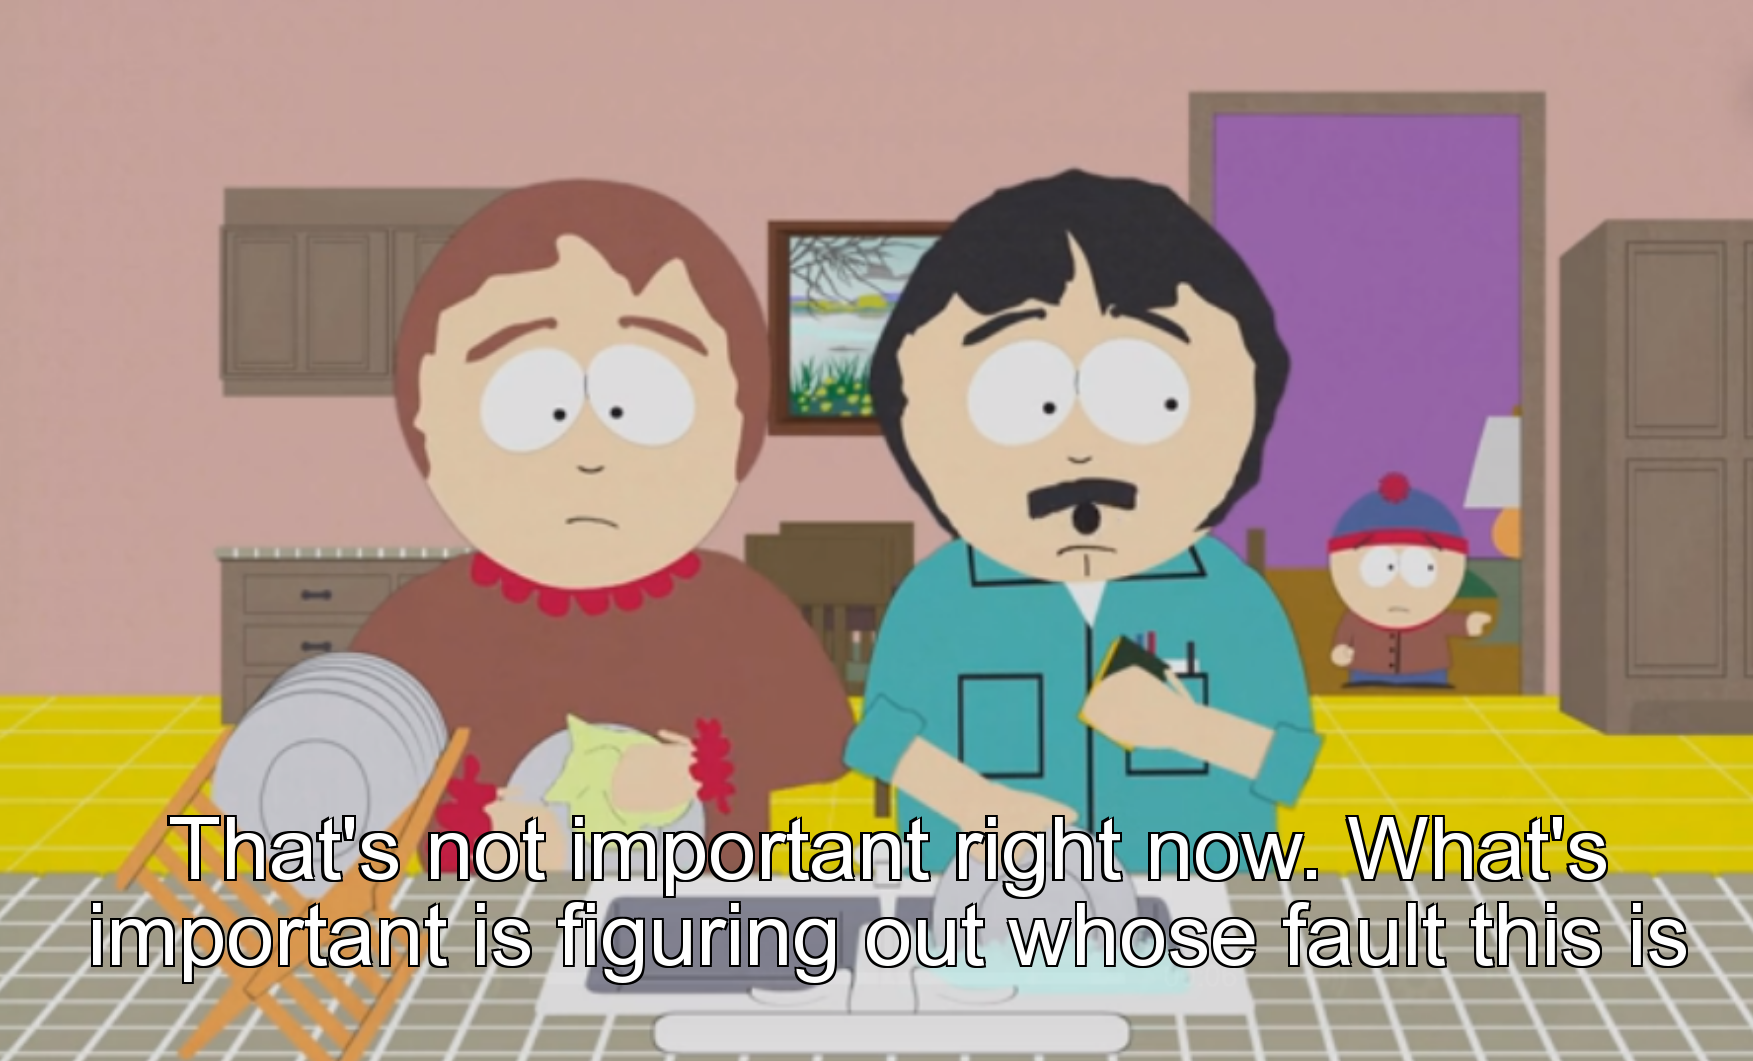 Scene from South Park TV series where Stan's Father is telling his Son 'That's not what's important right now. What's important is figuring out whose fault this is.'